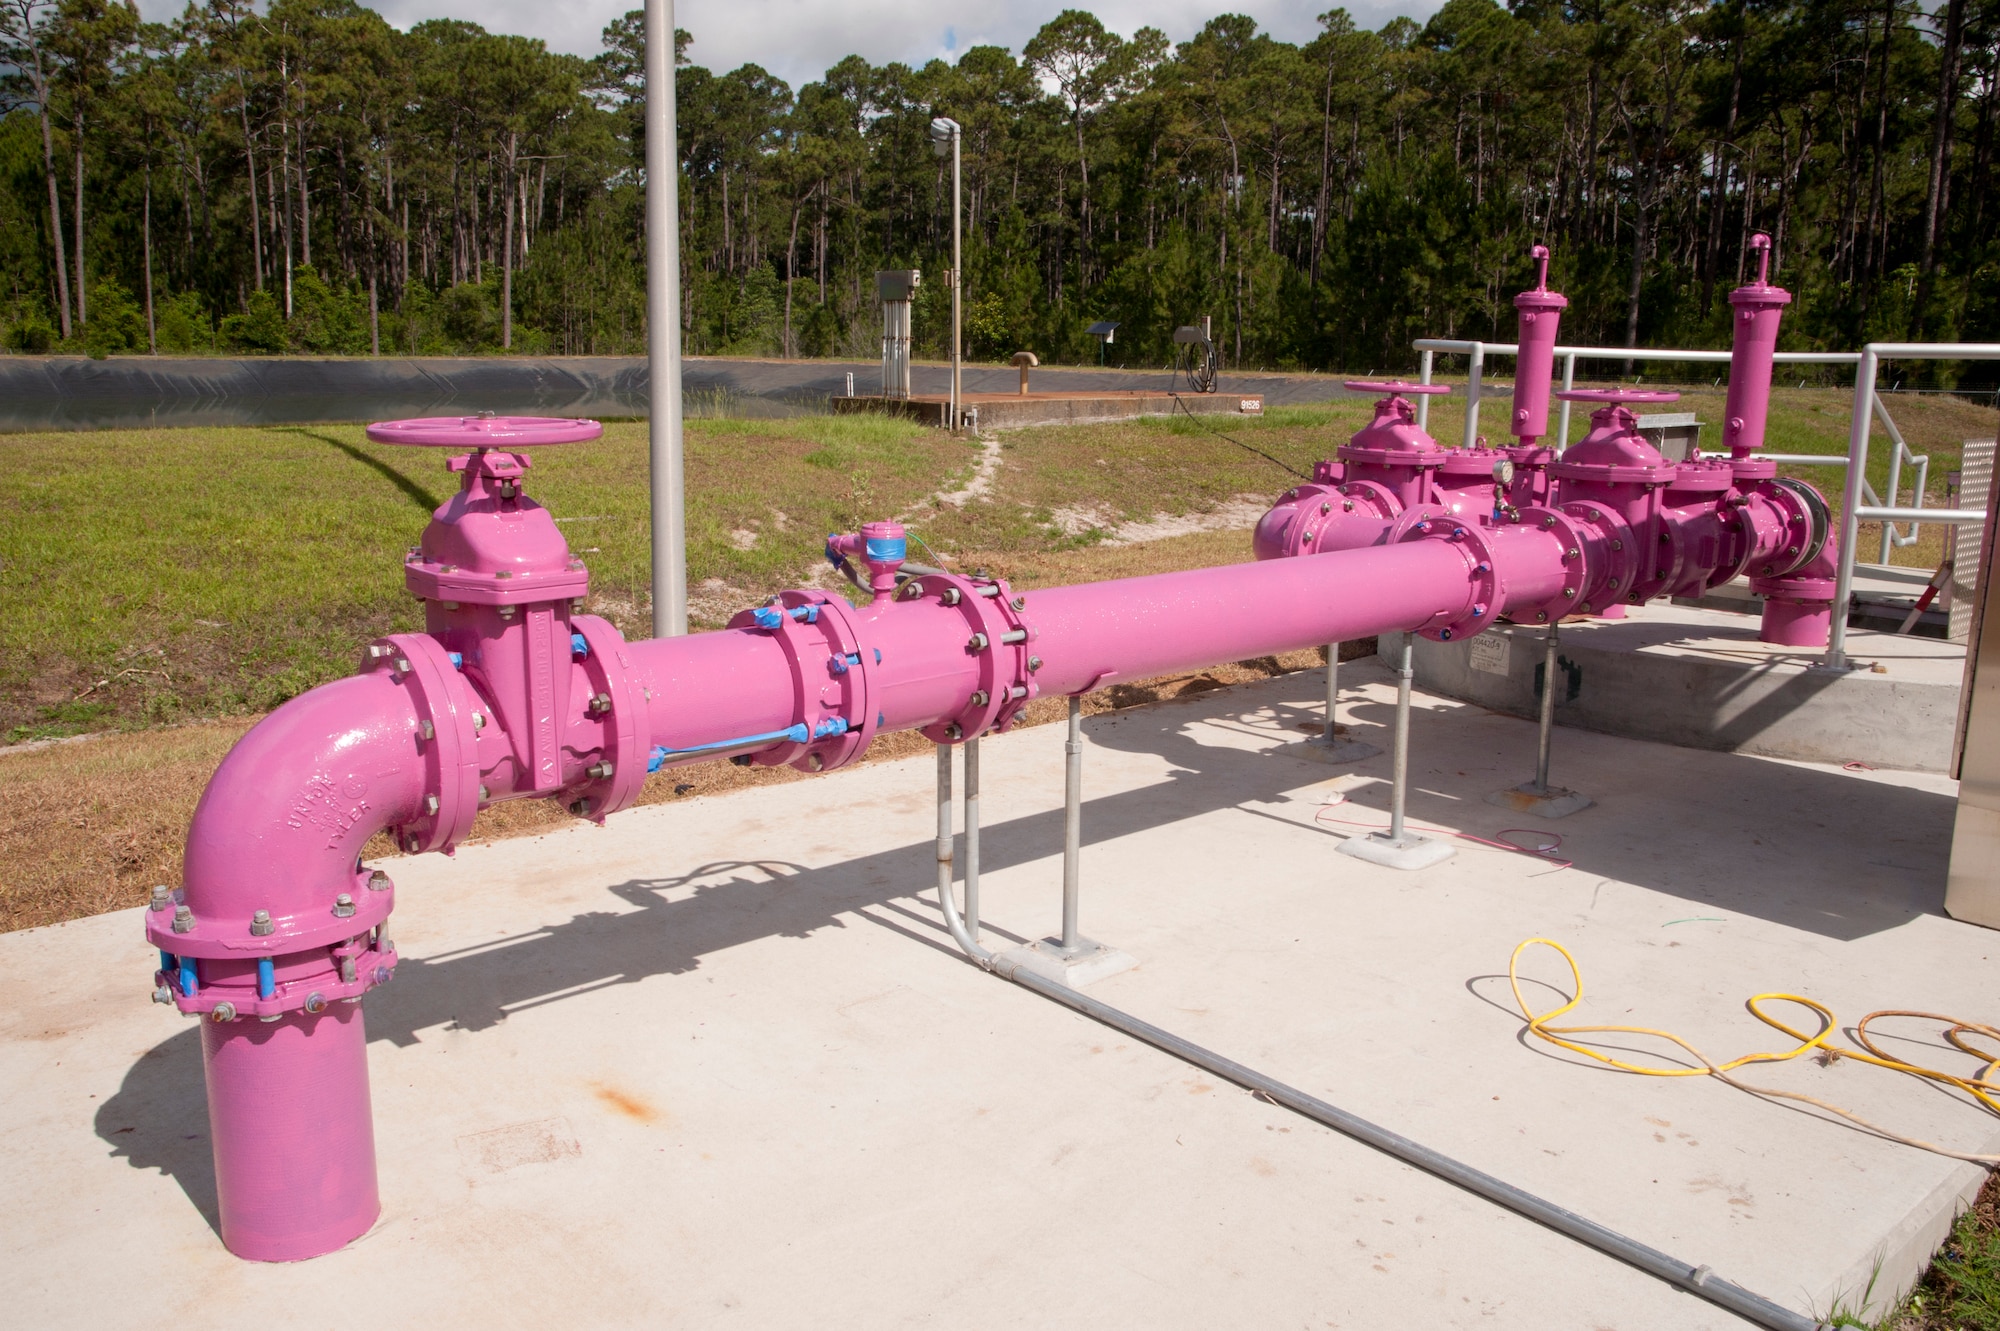 Purple pipes signify the use of reclaimed water at the Advanced Wastewater Treatment Plant on Hurlburt Field, Fla., June 4, 2013. The reclaimed water will be supplied to the CV-22 Osprey Helicopter wash rack, Air Park, community park/ball fields, Red Horse ball fields and other locations on base. (U.S. Air Force photo by Airman 1st Class Jeffrey Parkinson)